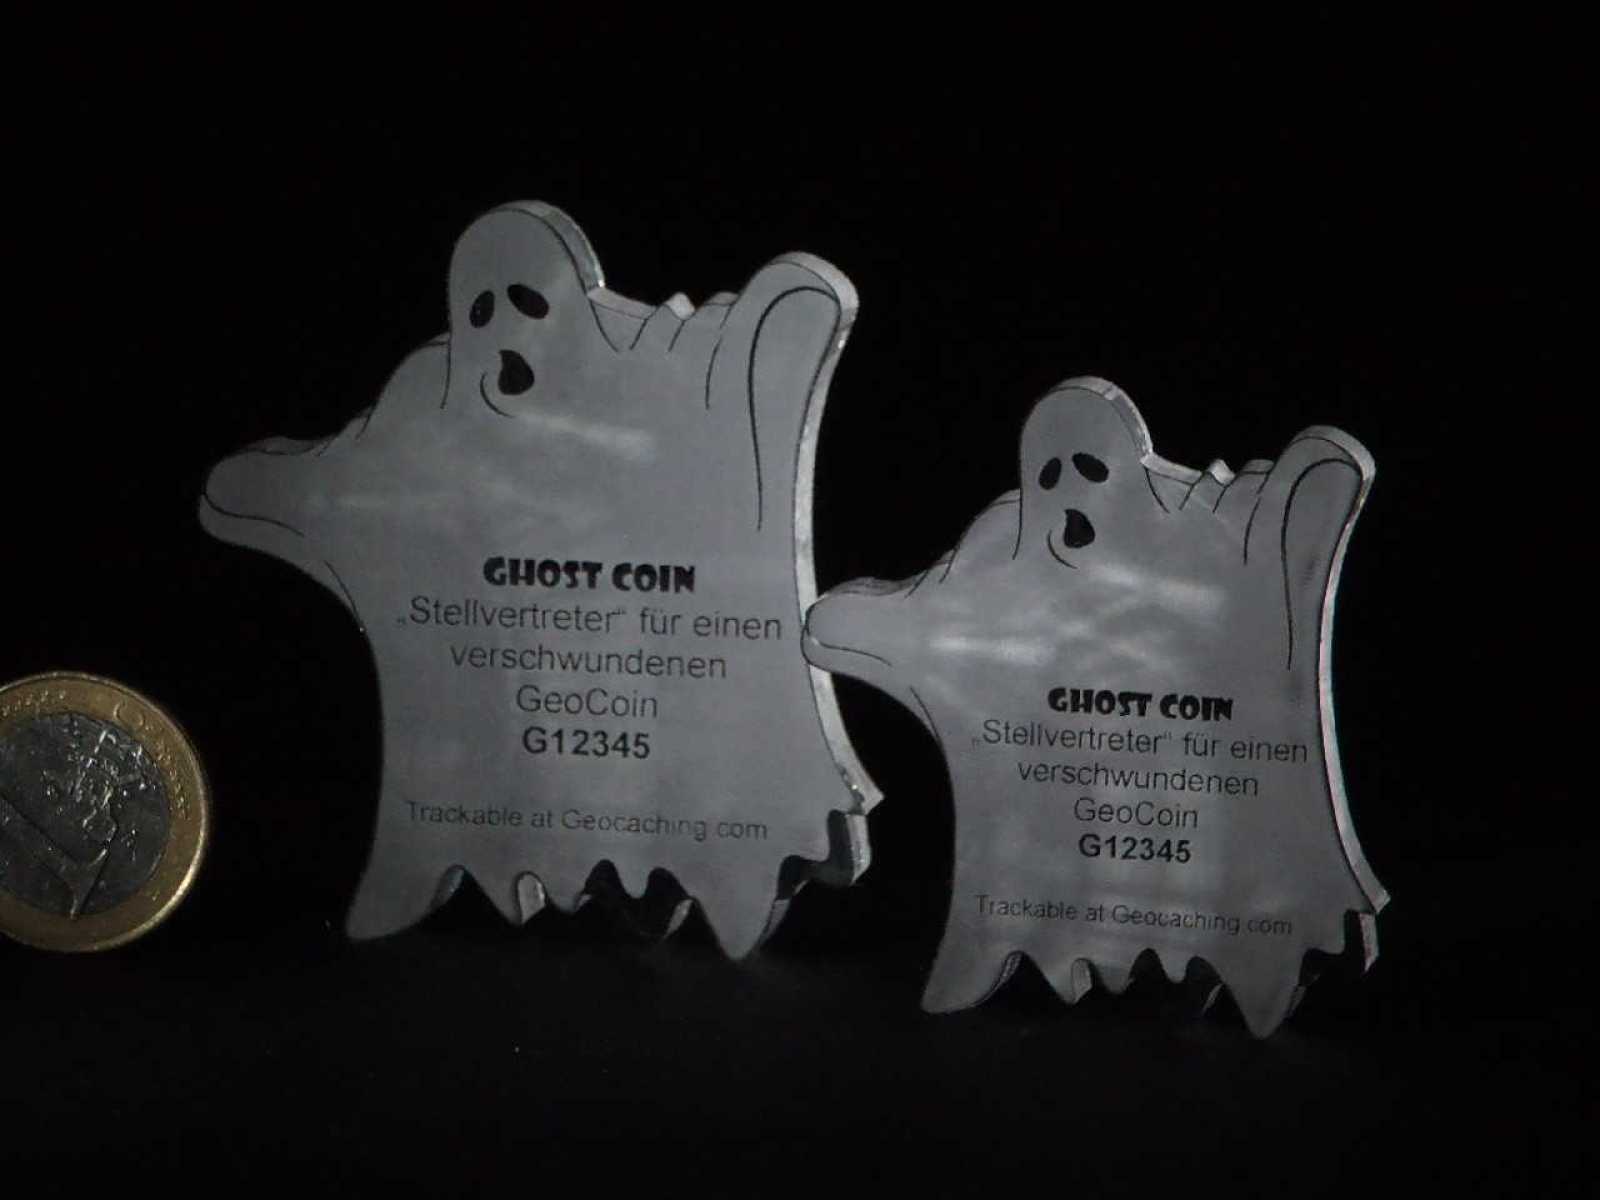 Lost Geocoin "The Ghost Coin #2"